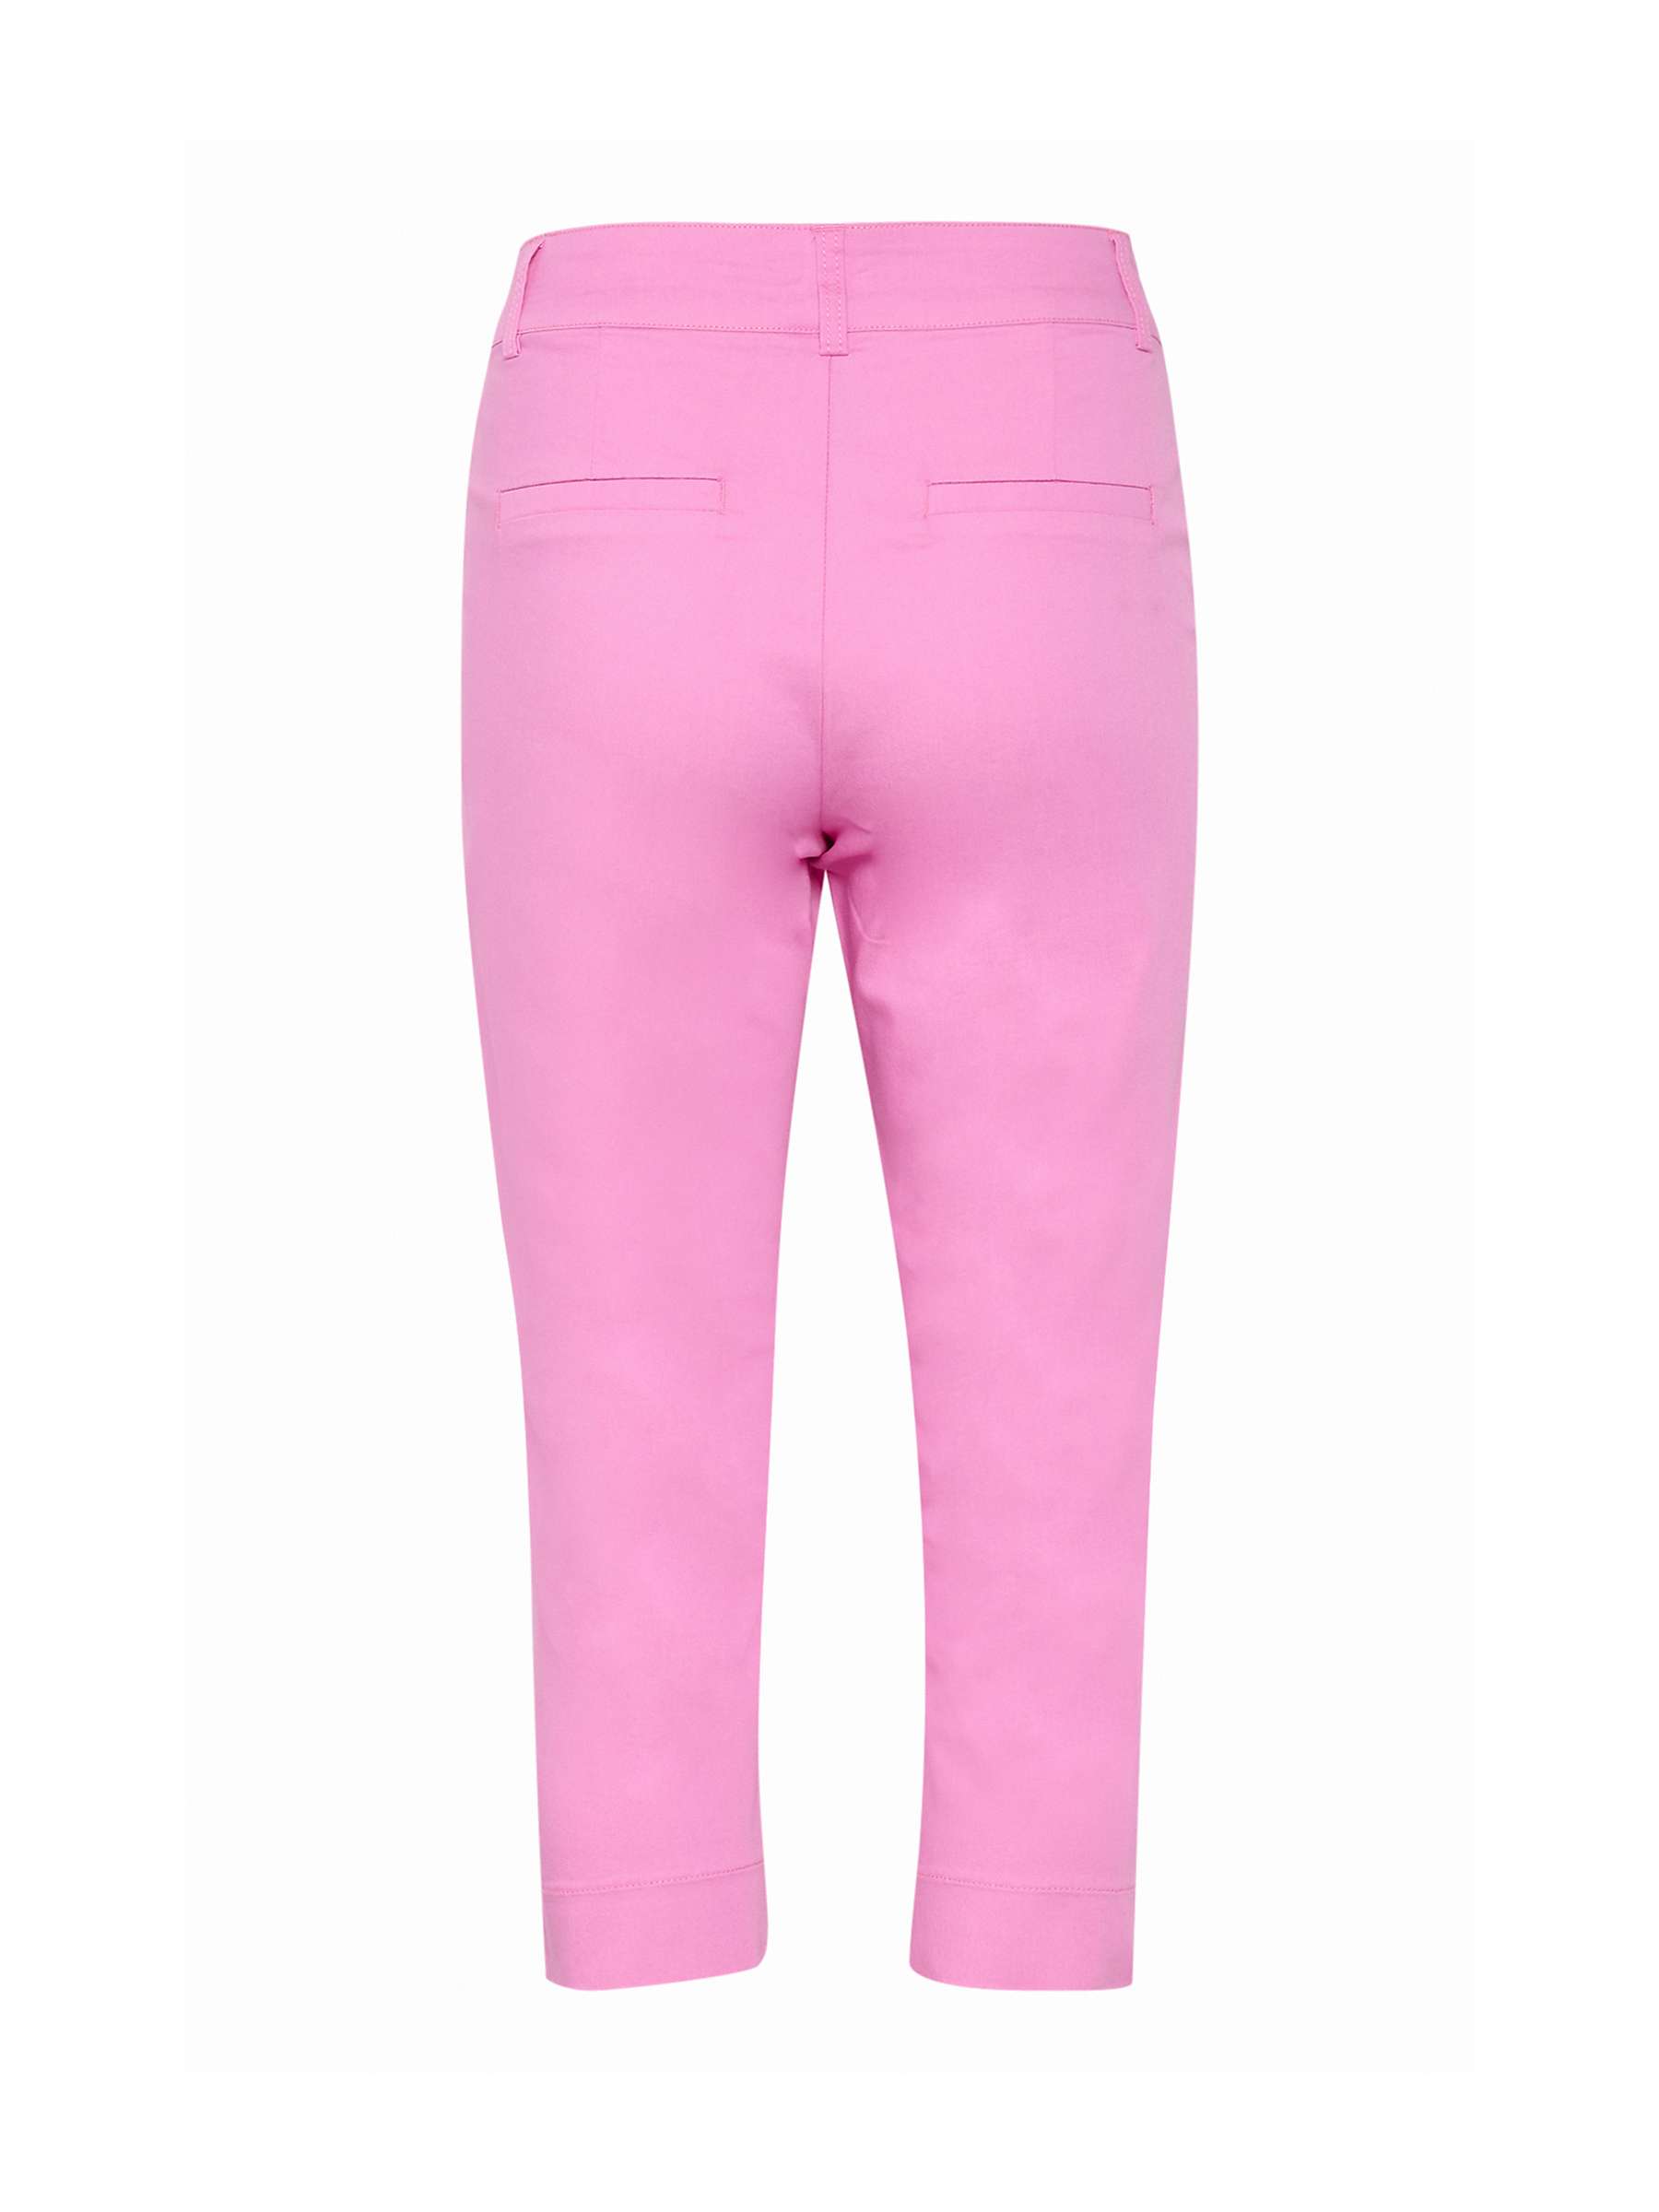 Buy KAFFE Lea 7/8 Skinny Chino Trousers Online at johnlewis.com